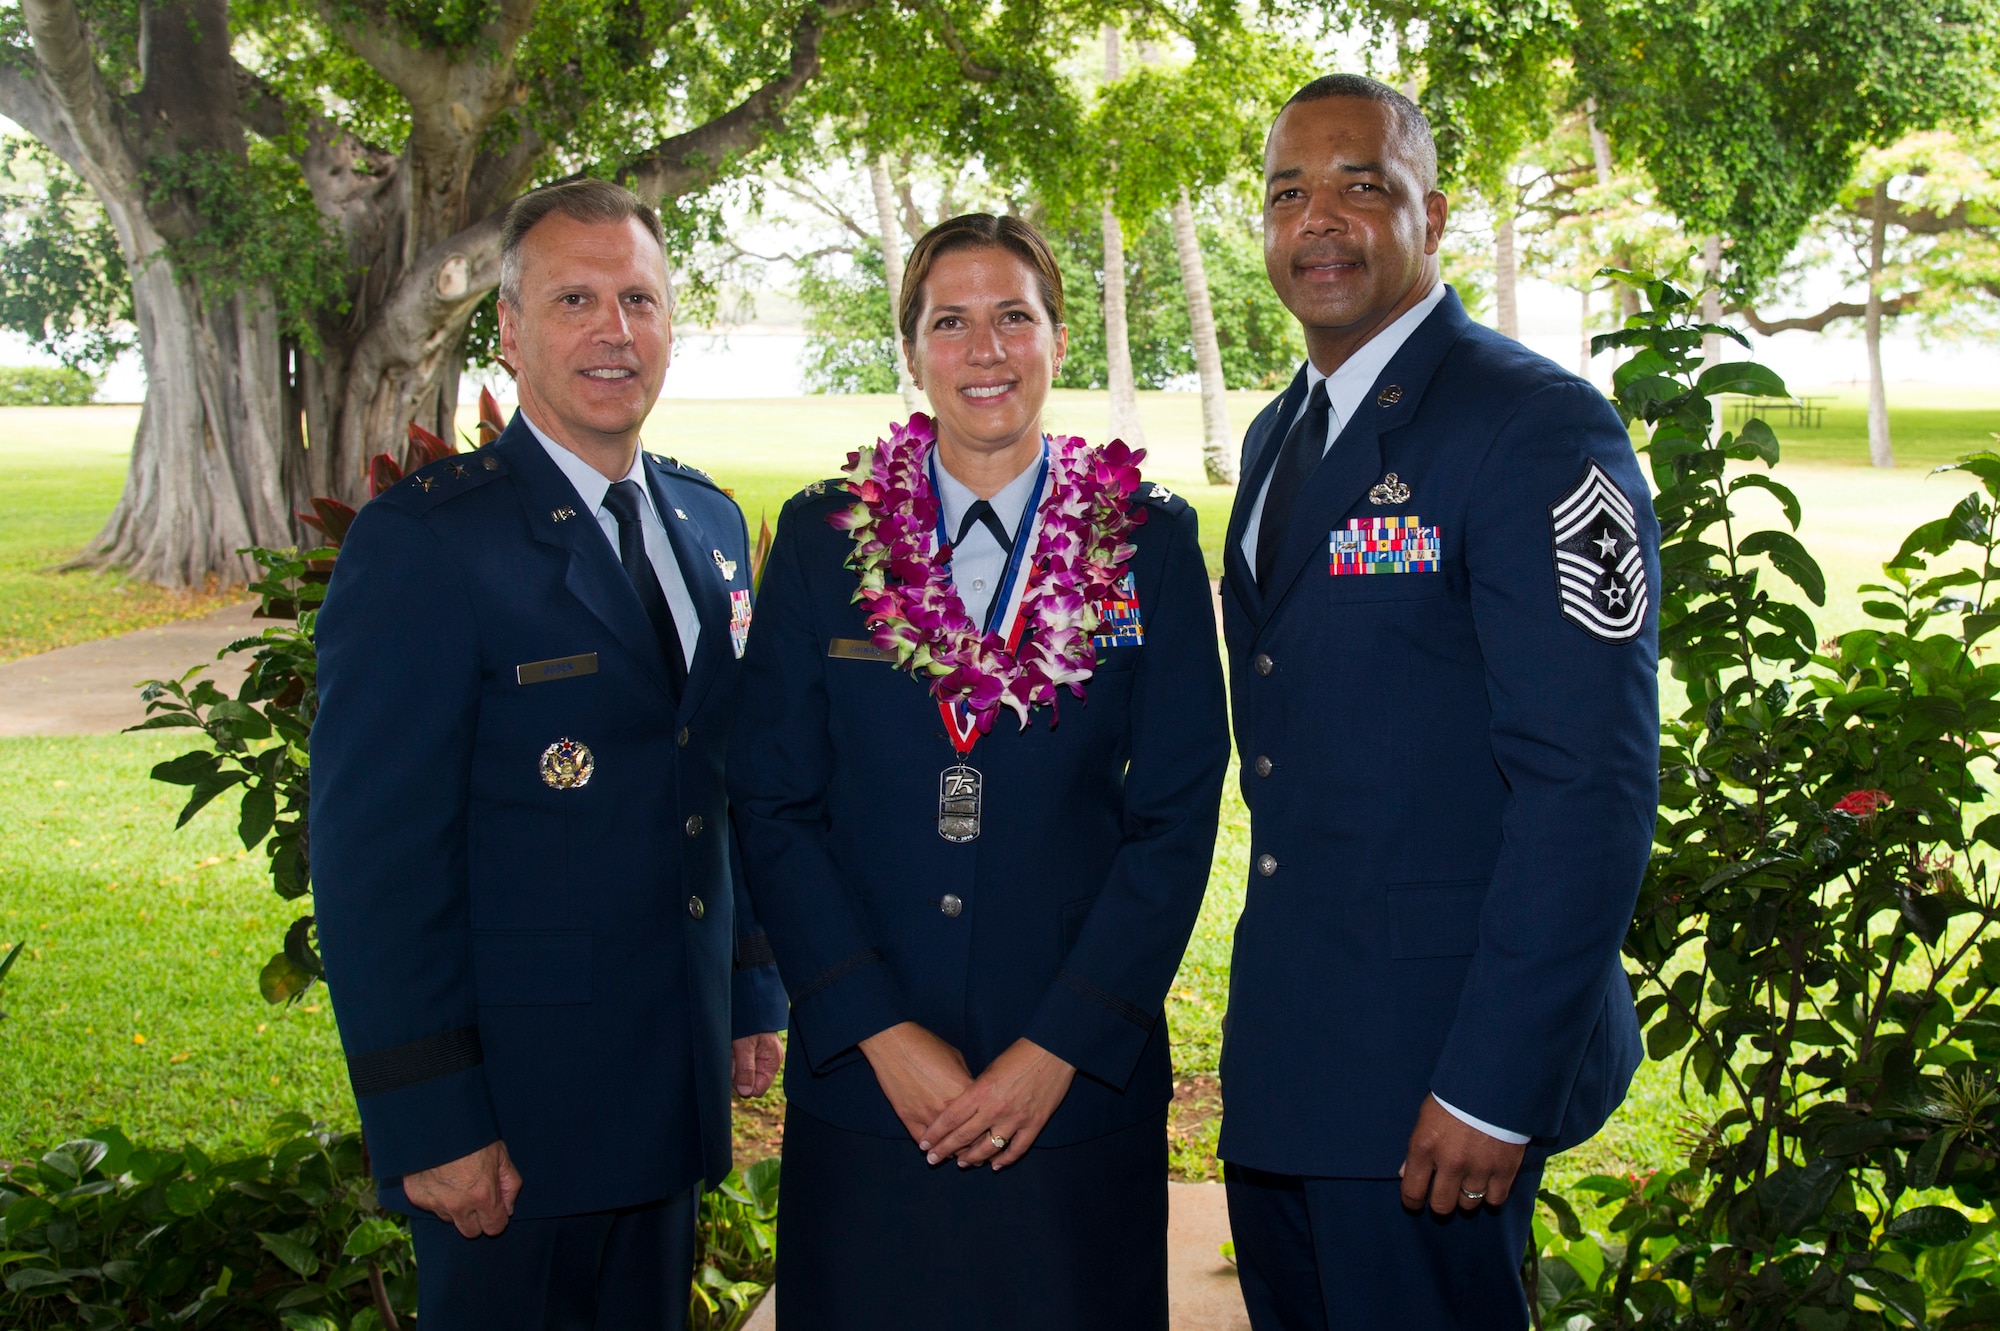 U.S. Air Force Maj. Gen. Randall Ogden, 4th Air Force commander, Col. Athanasia Shinas, 624th Regional Support Group commander, and Chief Master Sgt. Timothy White, 4th Air Force command chief, following an assumption of command ceremony at Joint Base Pearl Harbor-Hickam, Hawaii, July 7, 2018.